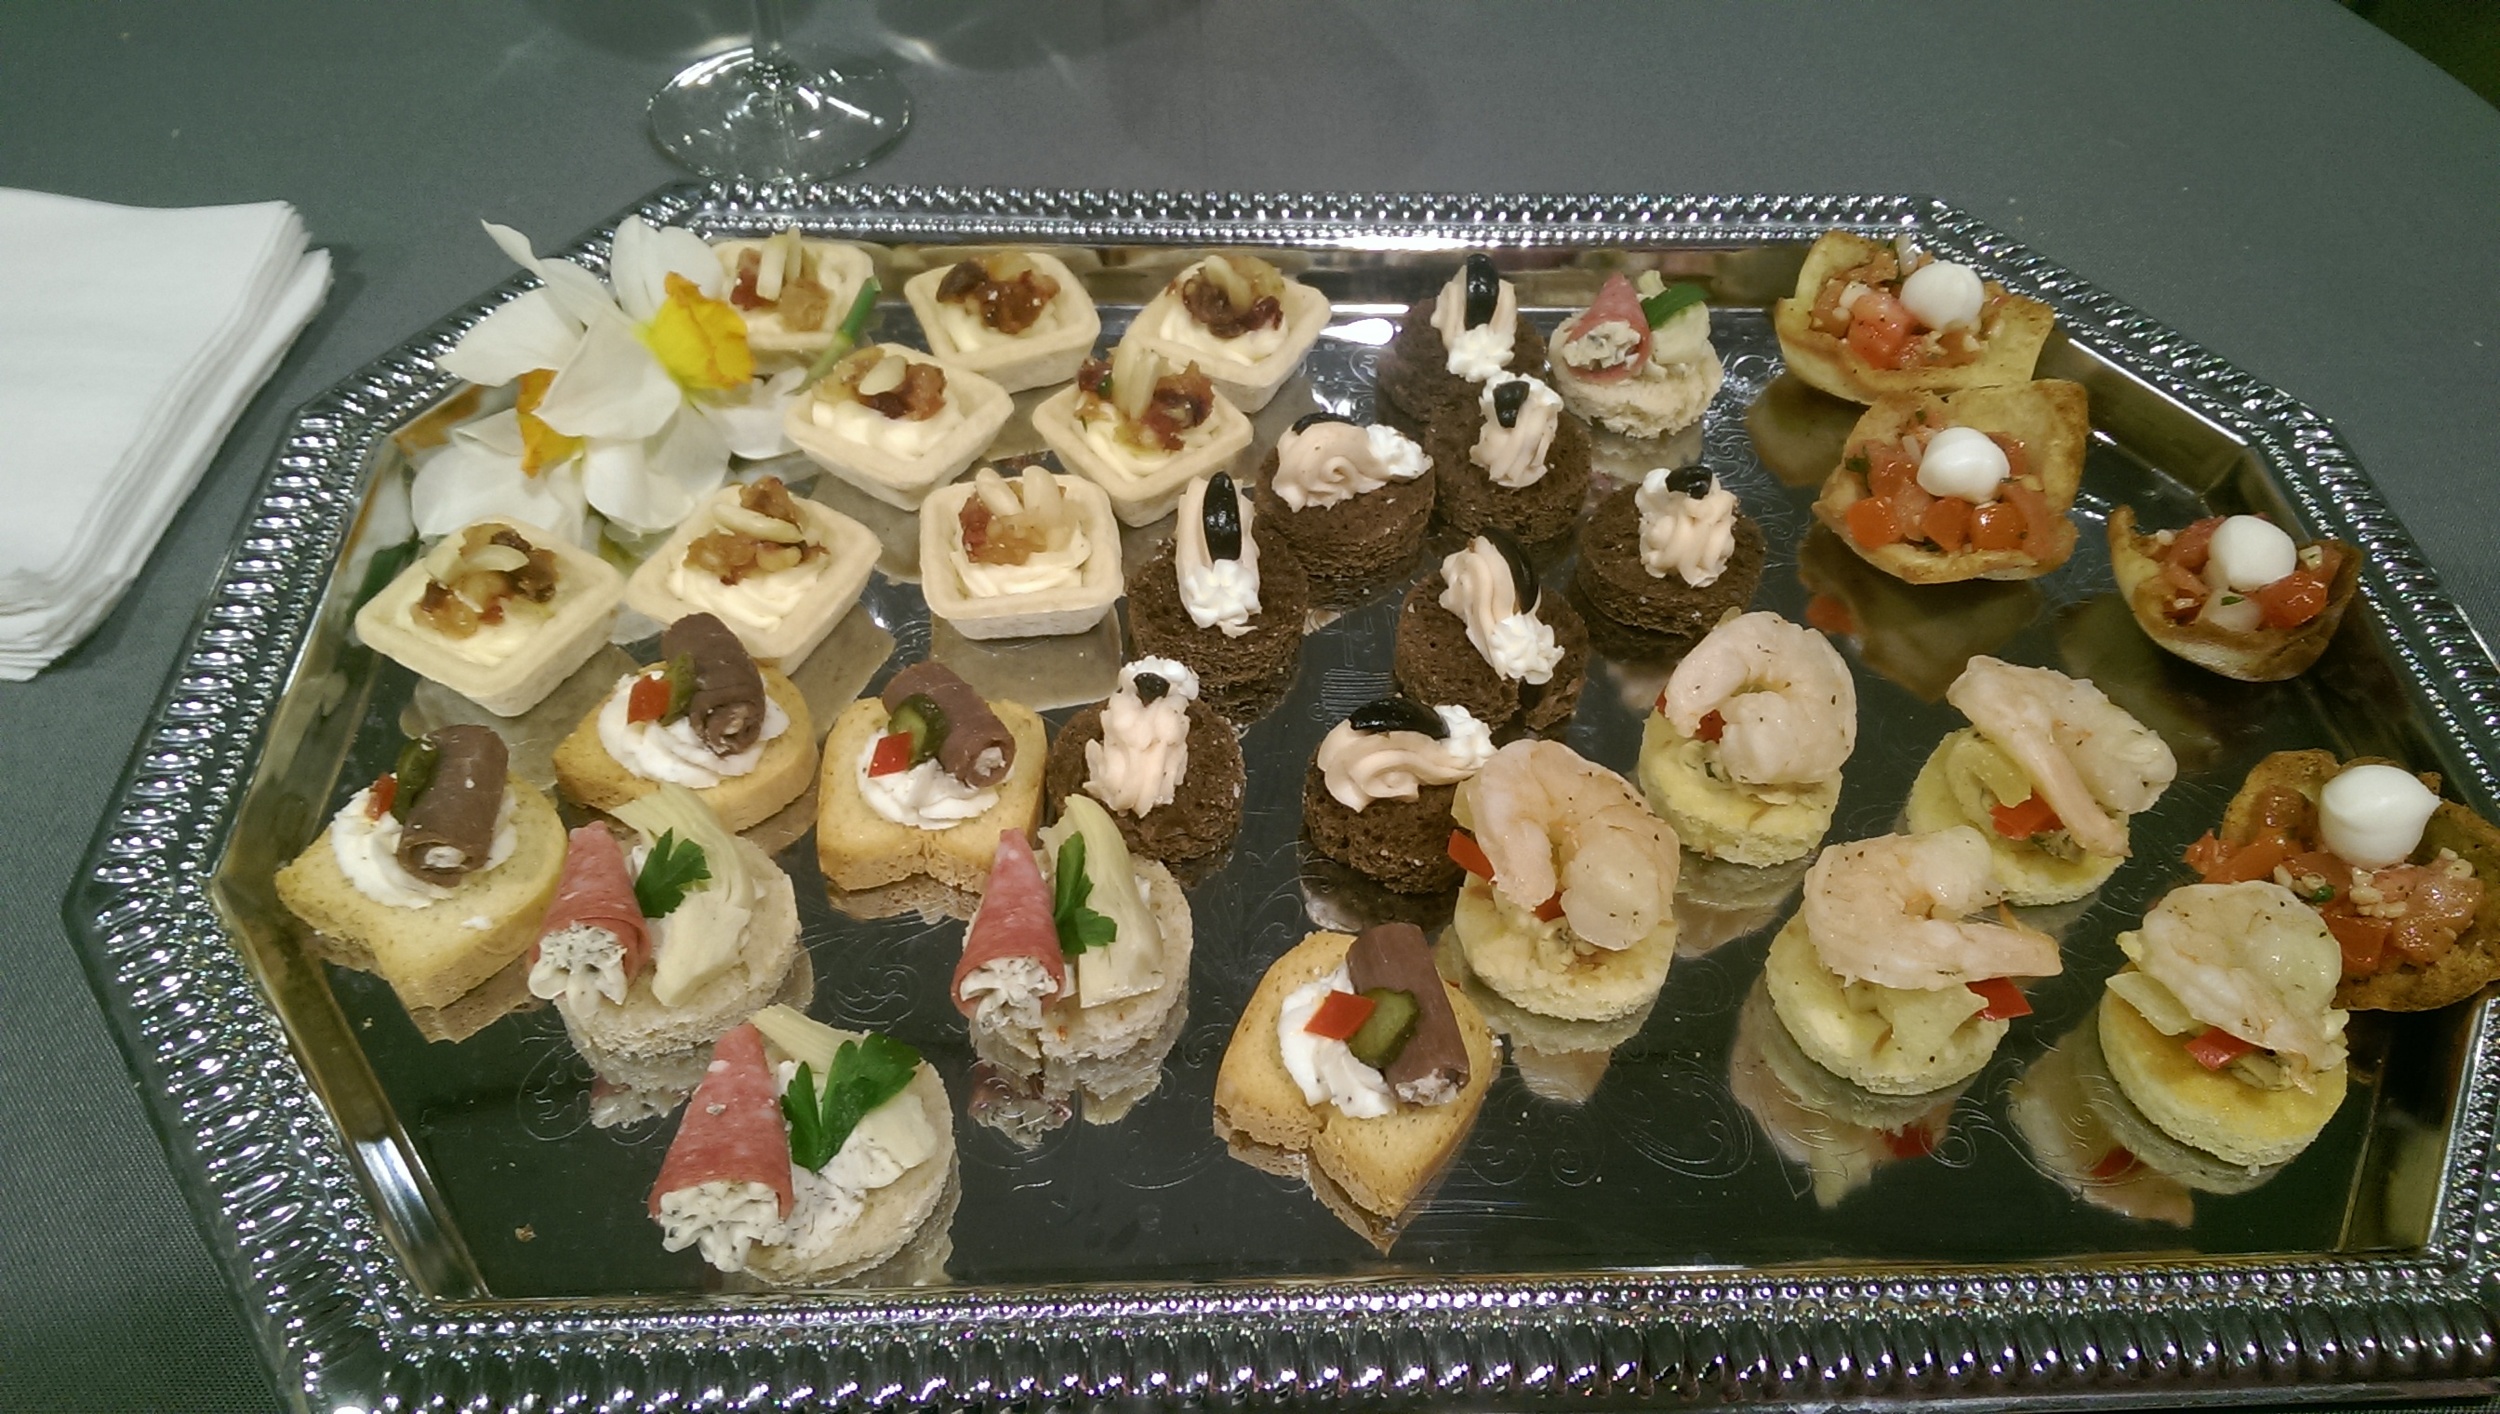   Various Passed Hors D'Oeuvres. Pictured is Roast Beef Roulades, Salami Trumpets with Artichoke,&nbsp;Grilled Shrimp with Pineapple on Coconut Jalapeno Cornbread, Salmon Mousse on Pumpernickel,&nbsp;Bruschetta in Pita Cups, and Baked Brie Cups with 